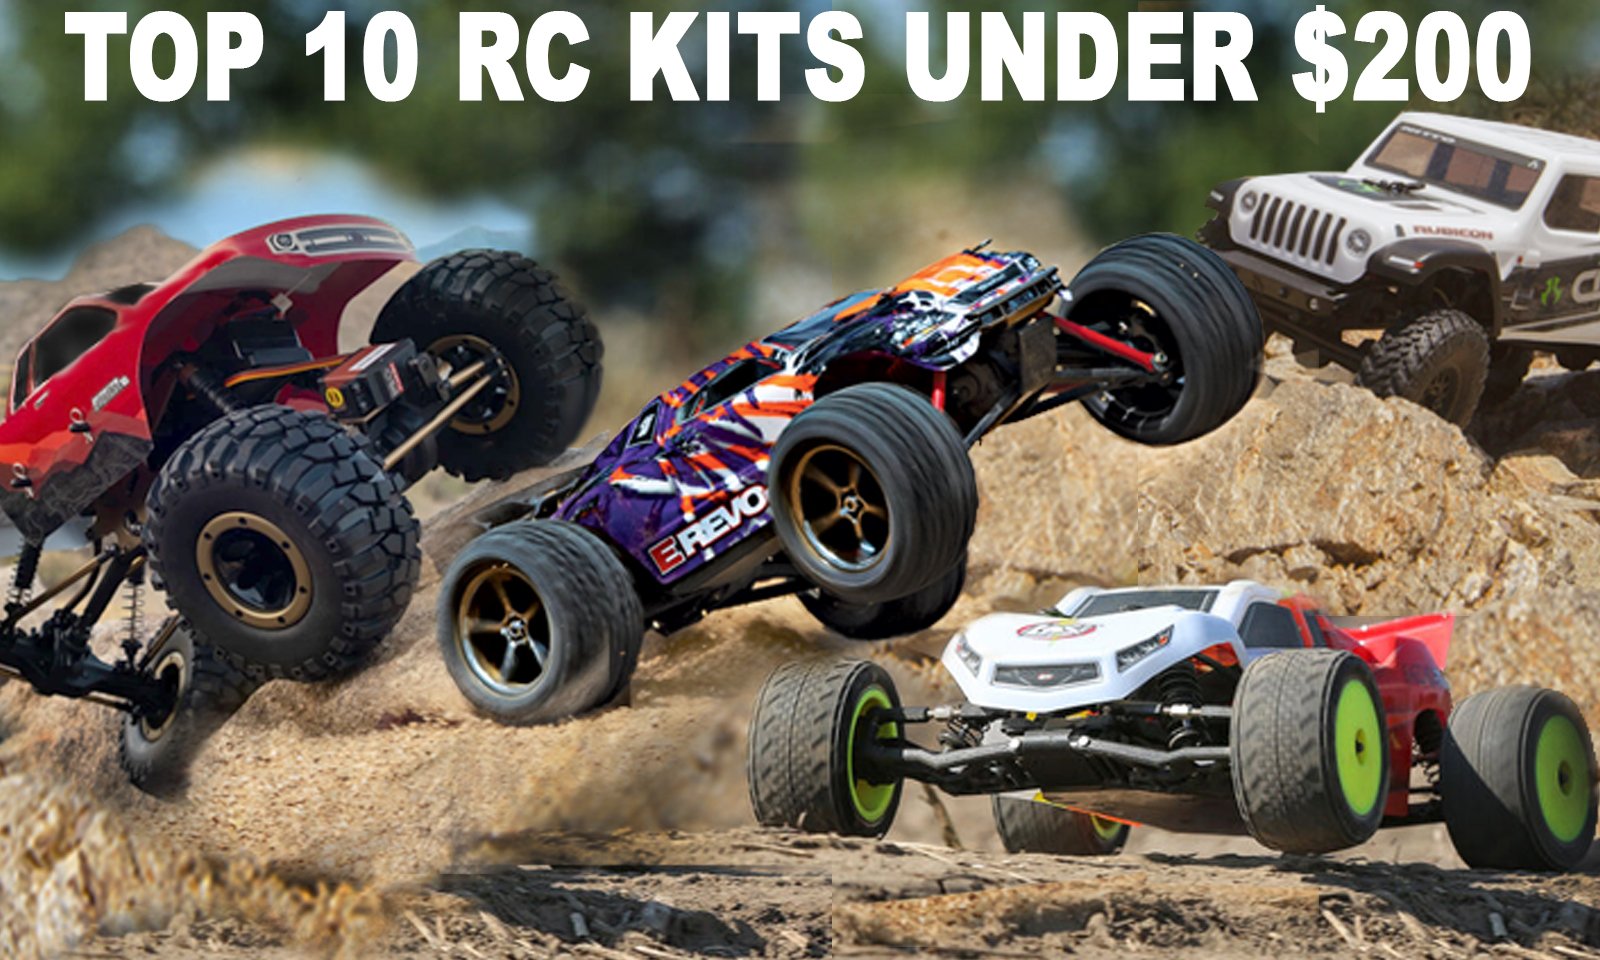 Top 10 RC Cars, Truck & Buggies Under $200